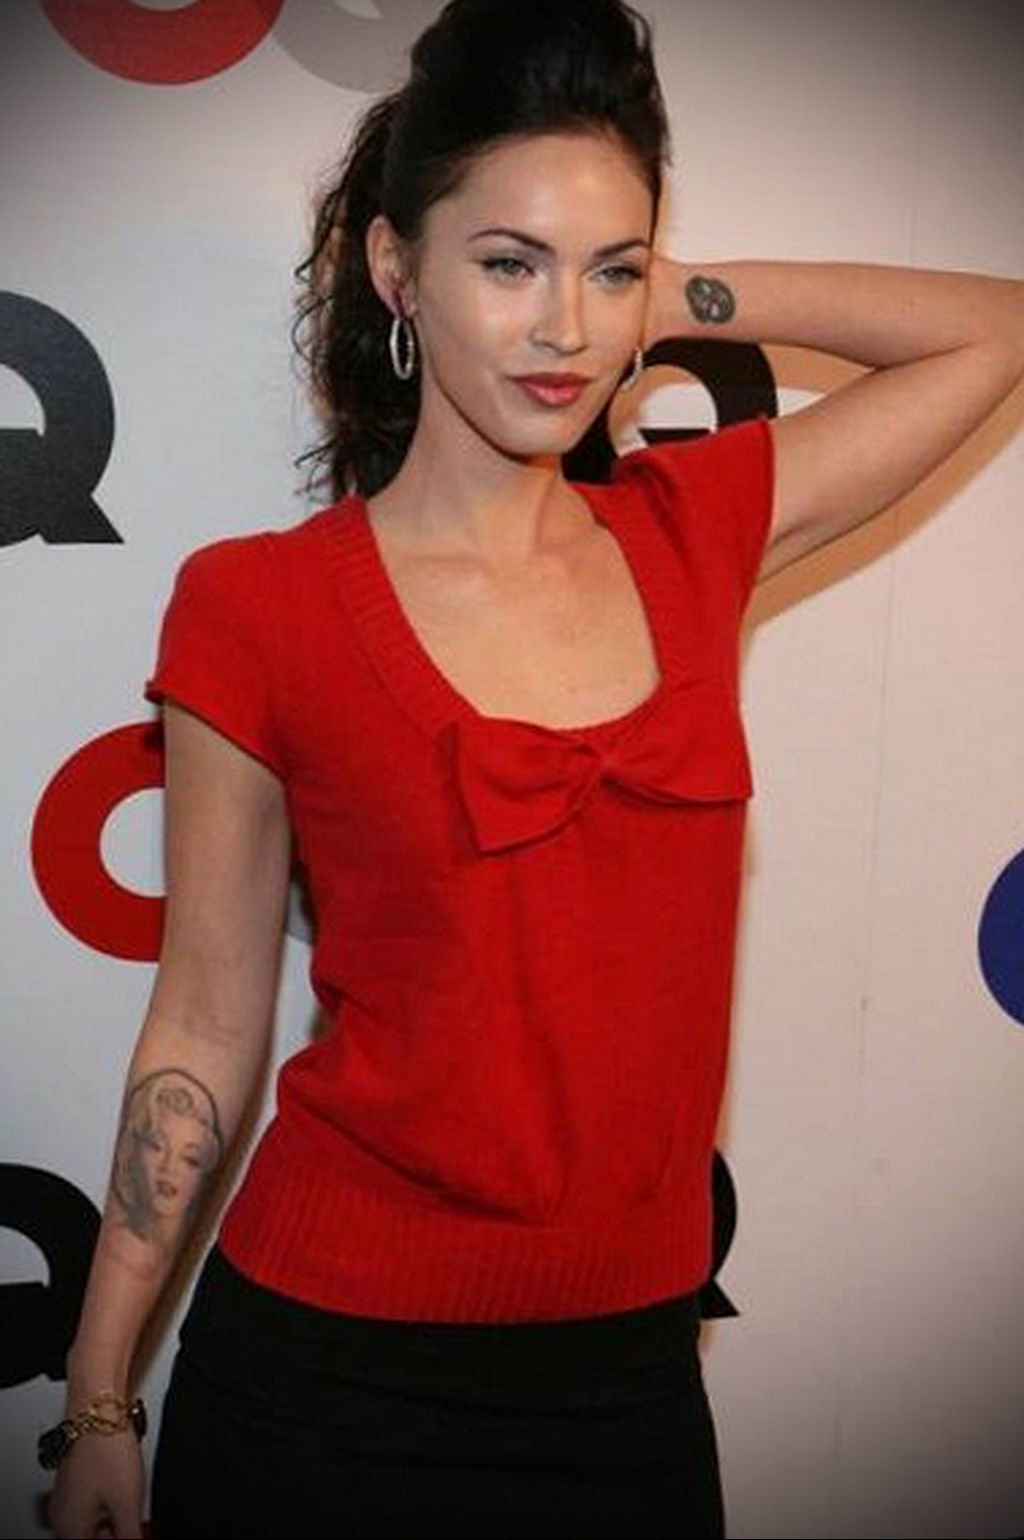 Megan Fox Tattoo / She sports some of the most talked about tattoos on